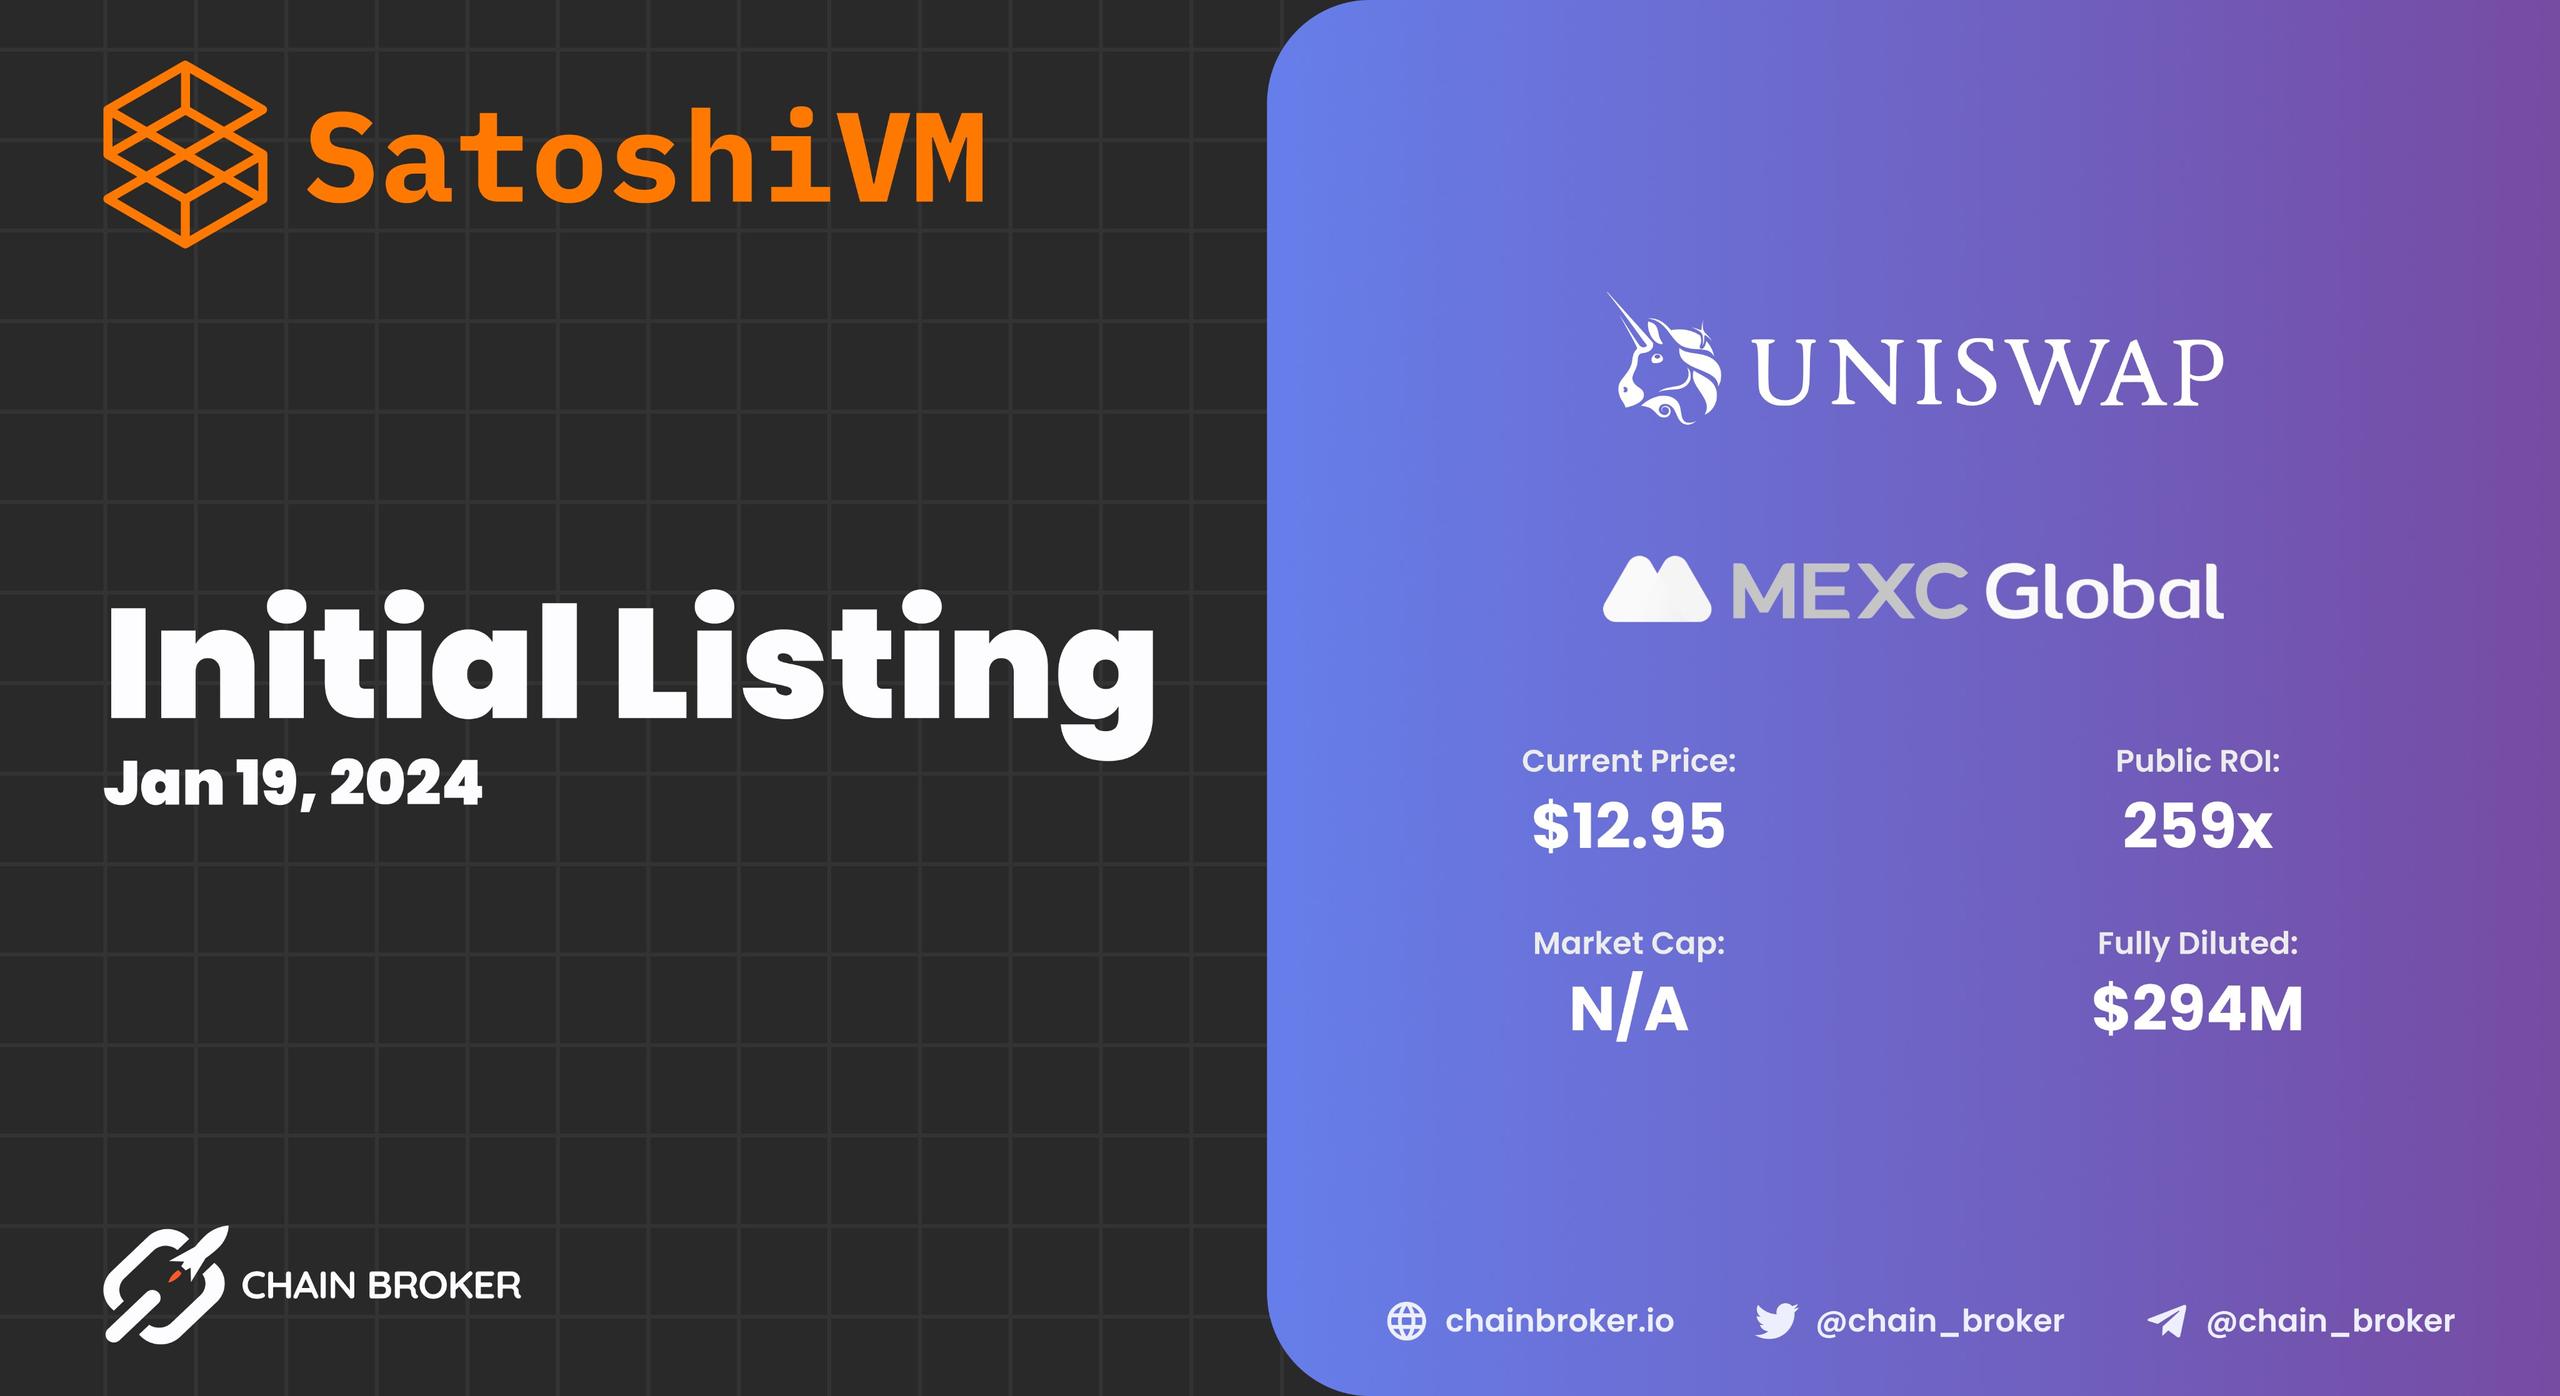 SatoshiVM has been Listed